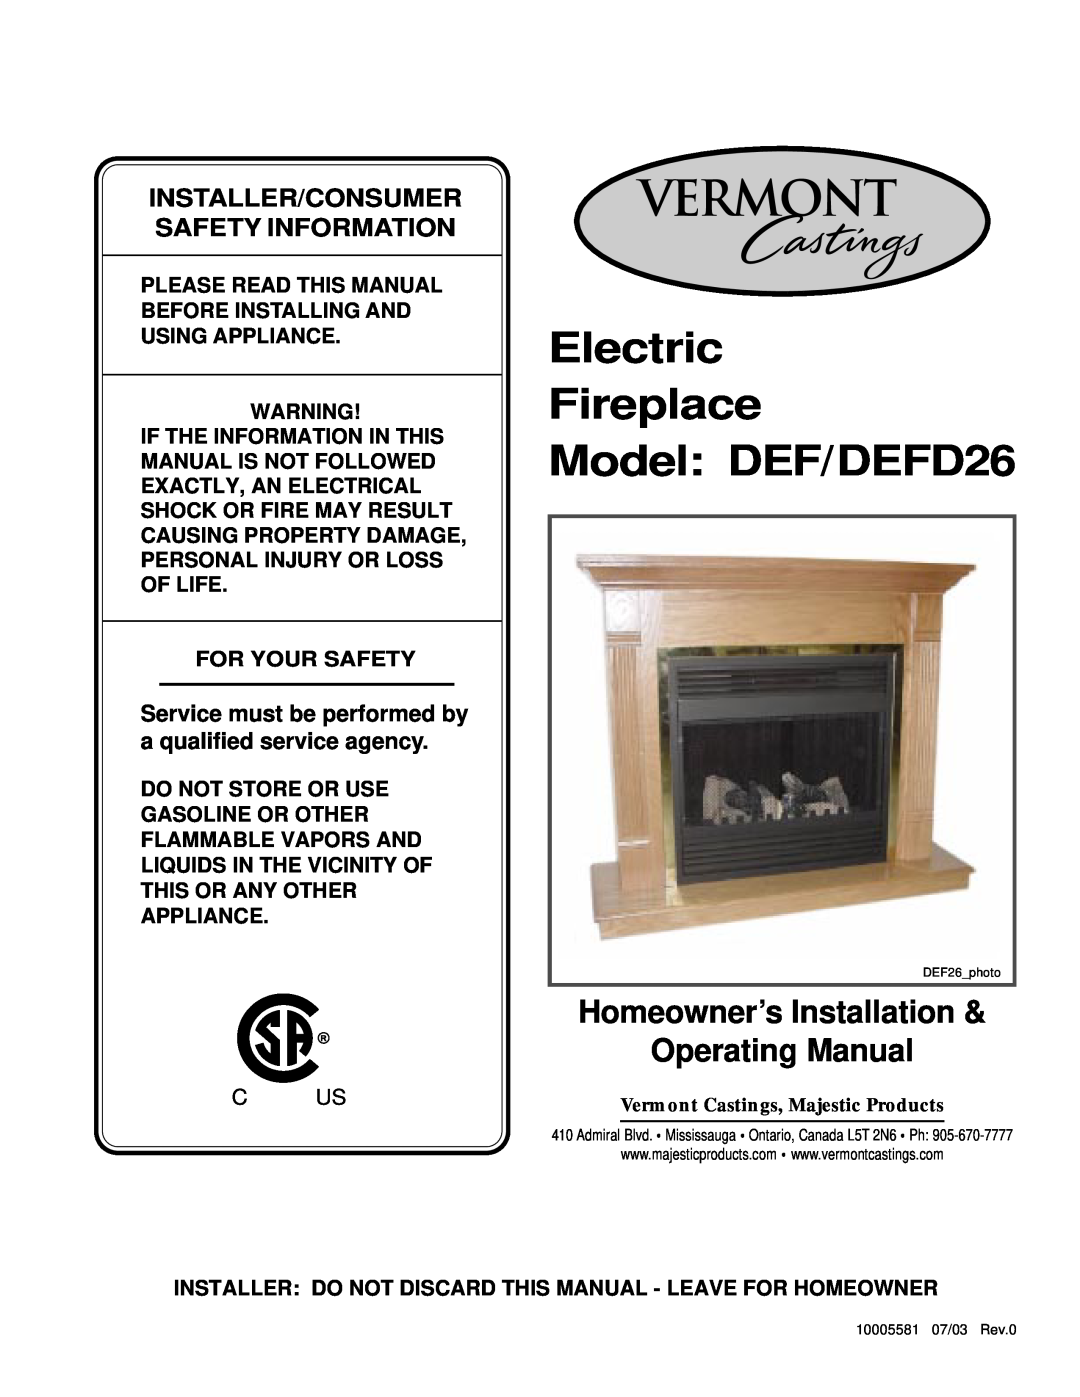 Vermont Casting manual Electric Fireplace Model DEF/DEFD26, Homeowner’s Installation & Operating Manual 